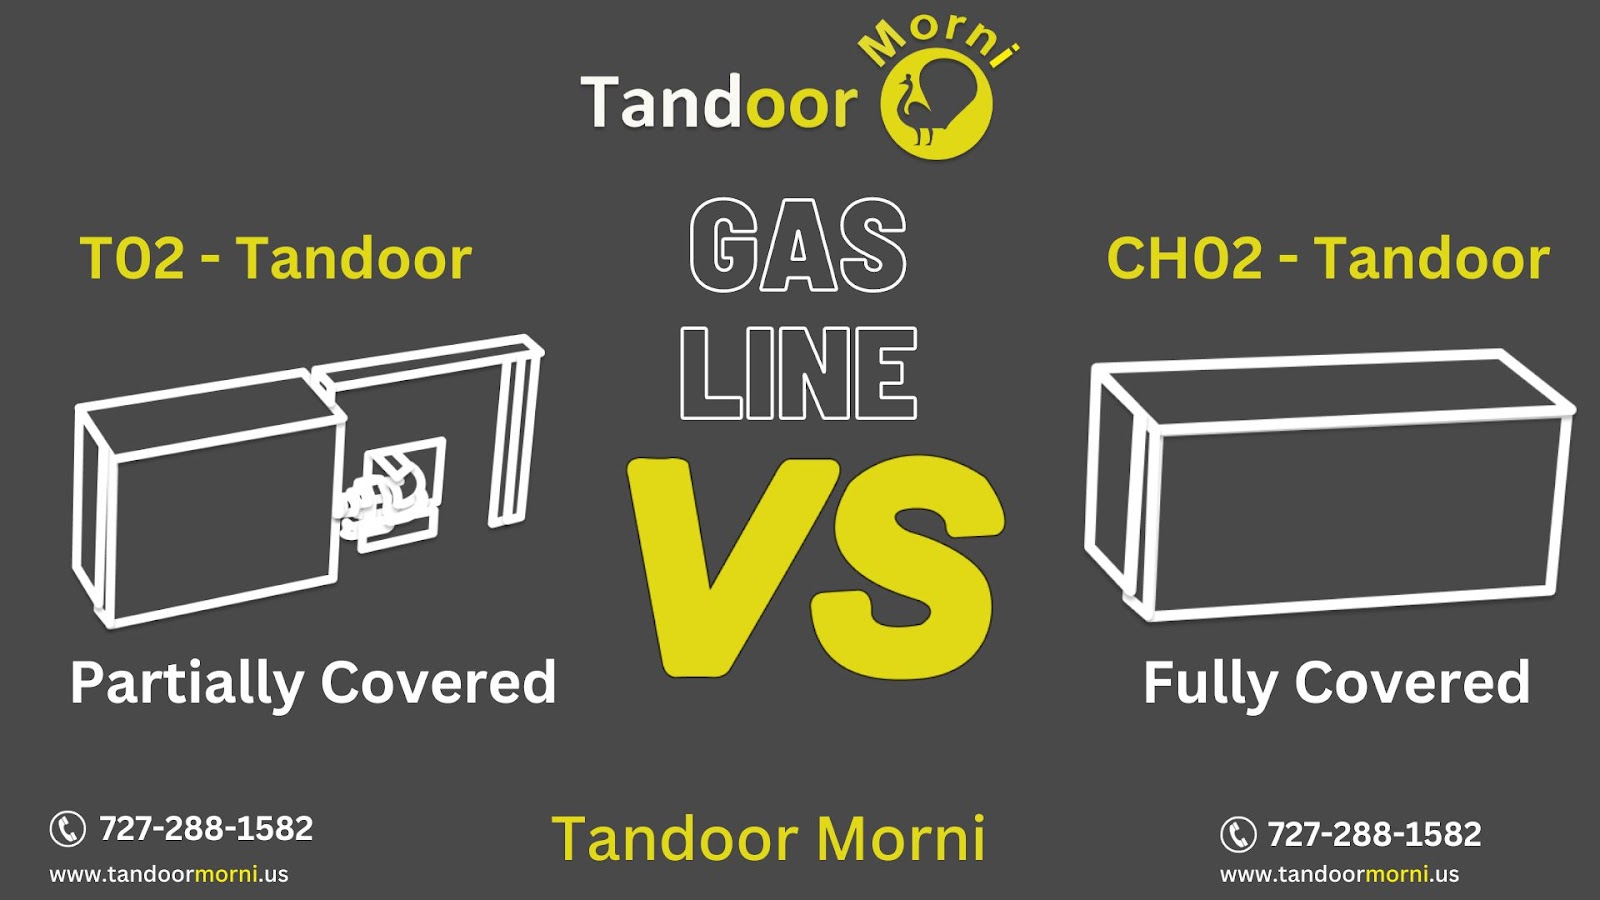 T02 refers to a partially covered gas line, whereas CH02 refers to a fully covered gas line.